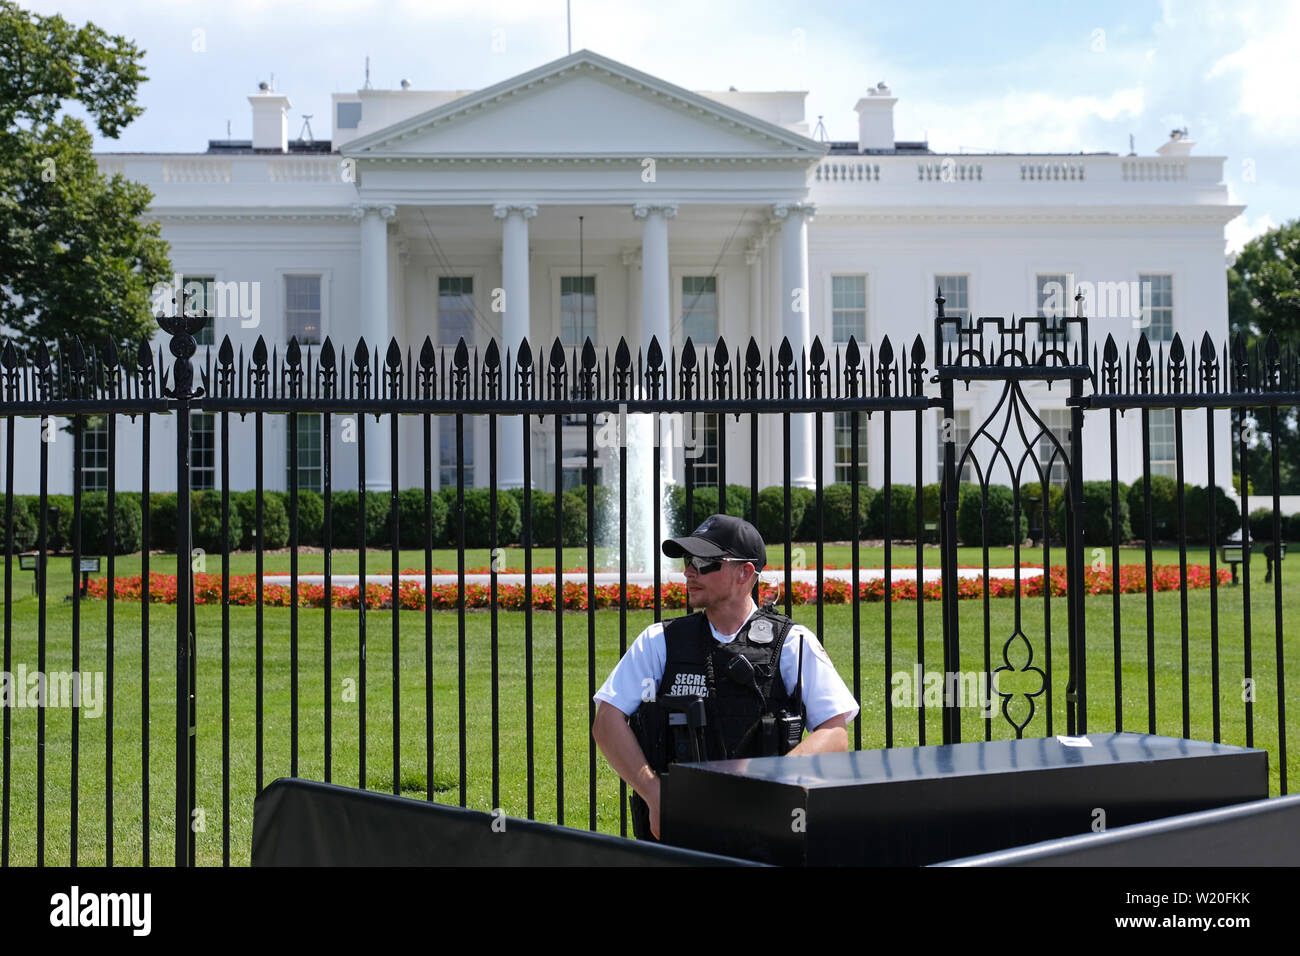 A secret service agent stands in front of The White House on Pennsylvania Avenue NW in Washington, D.C. Stock Photo